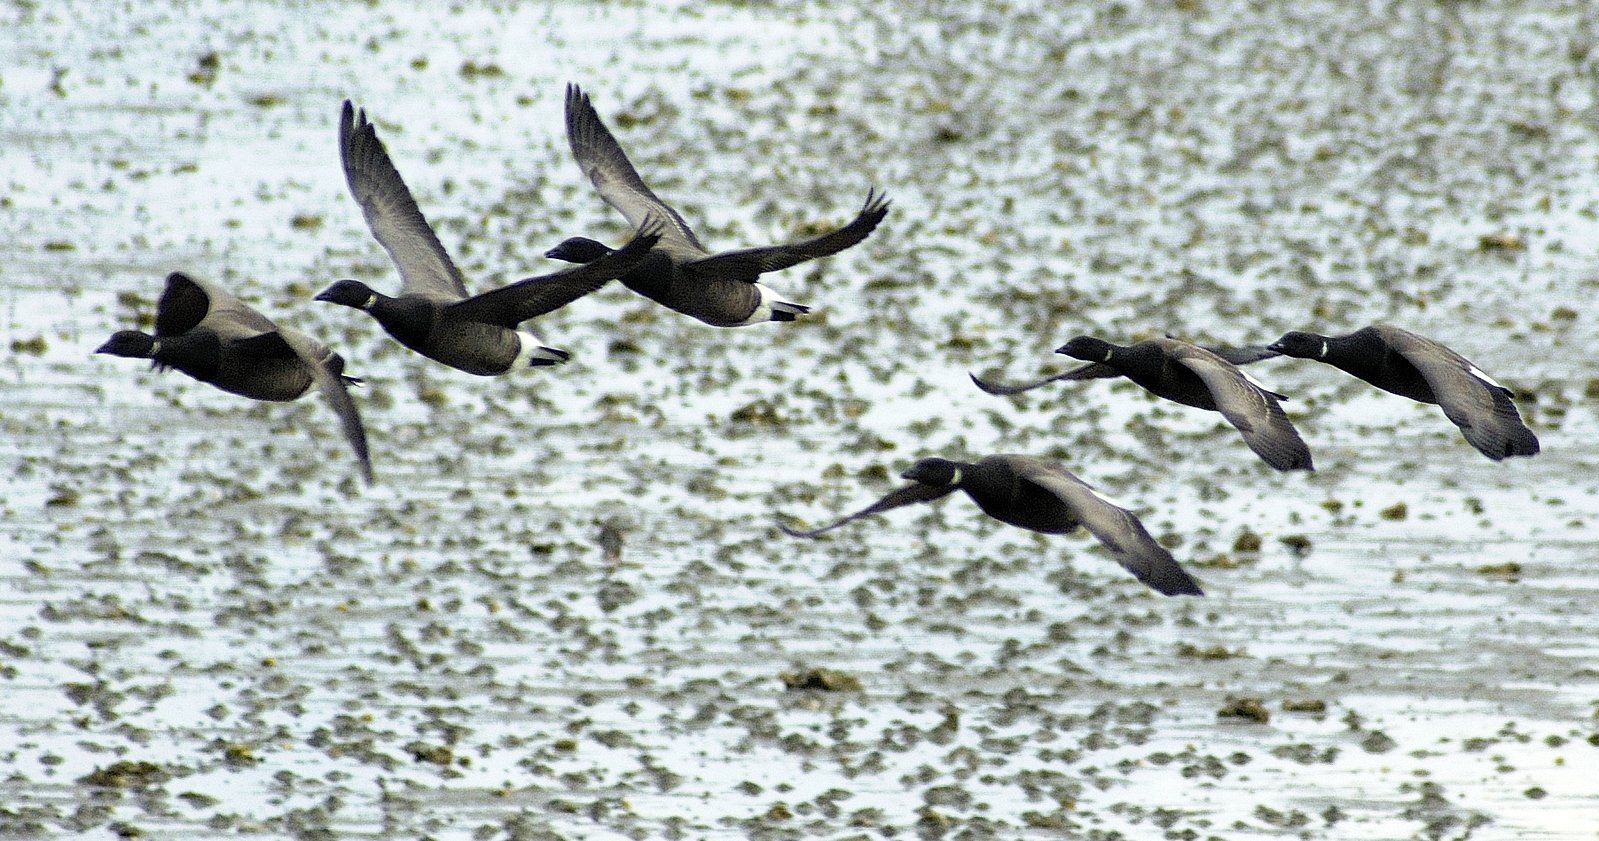 several birds are flying over the sand in the water